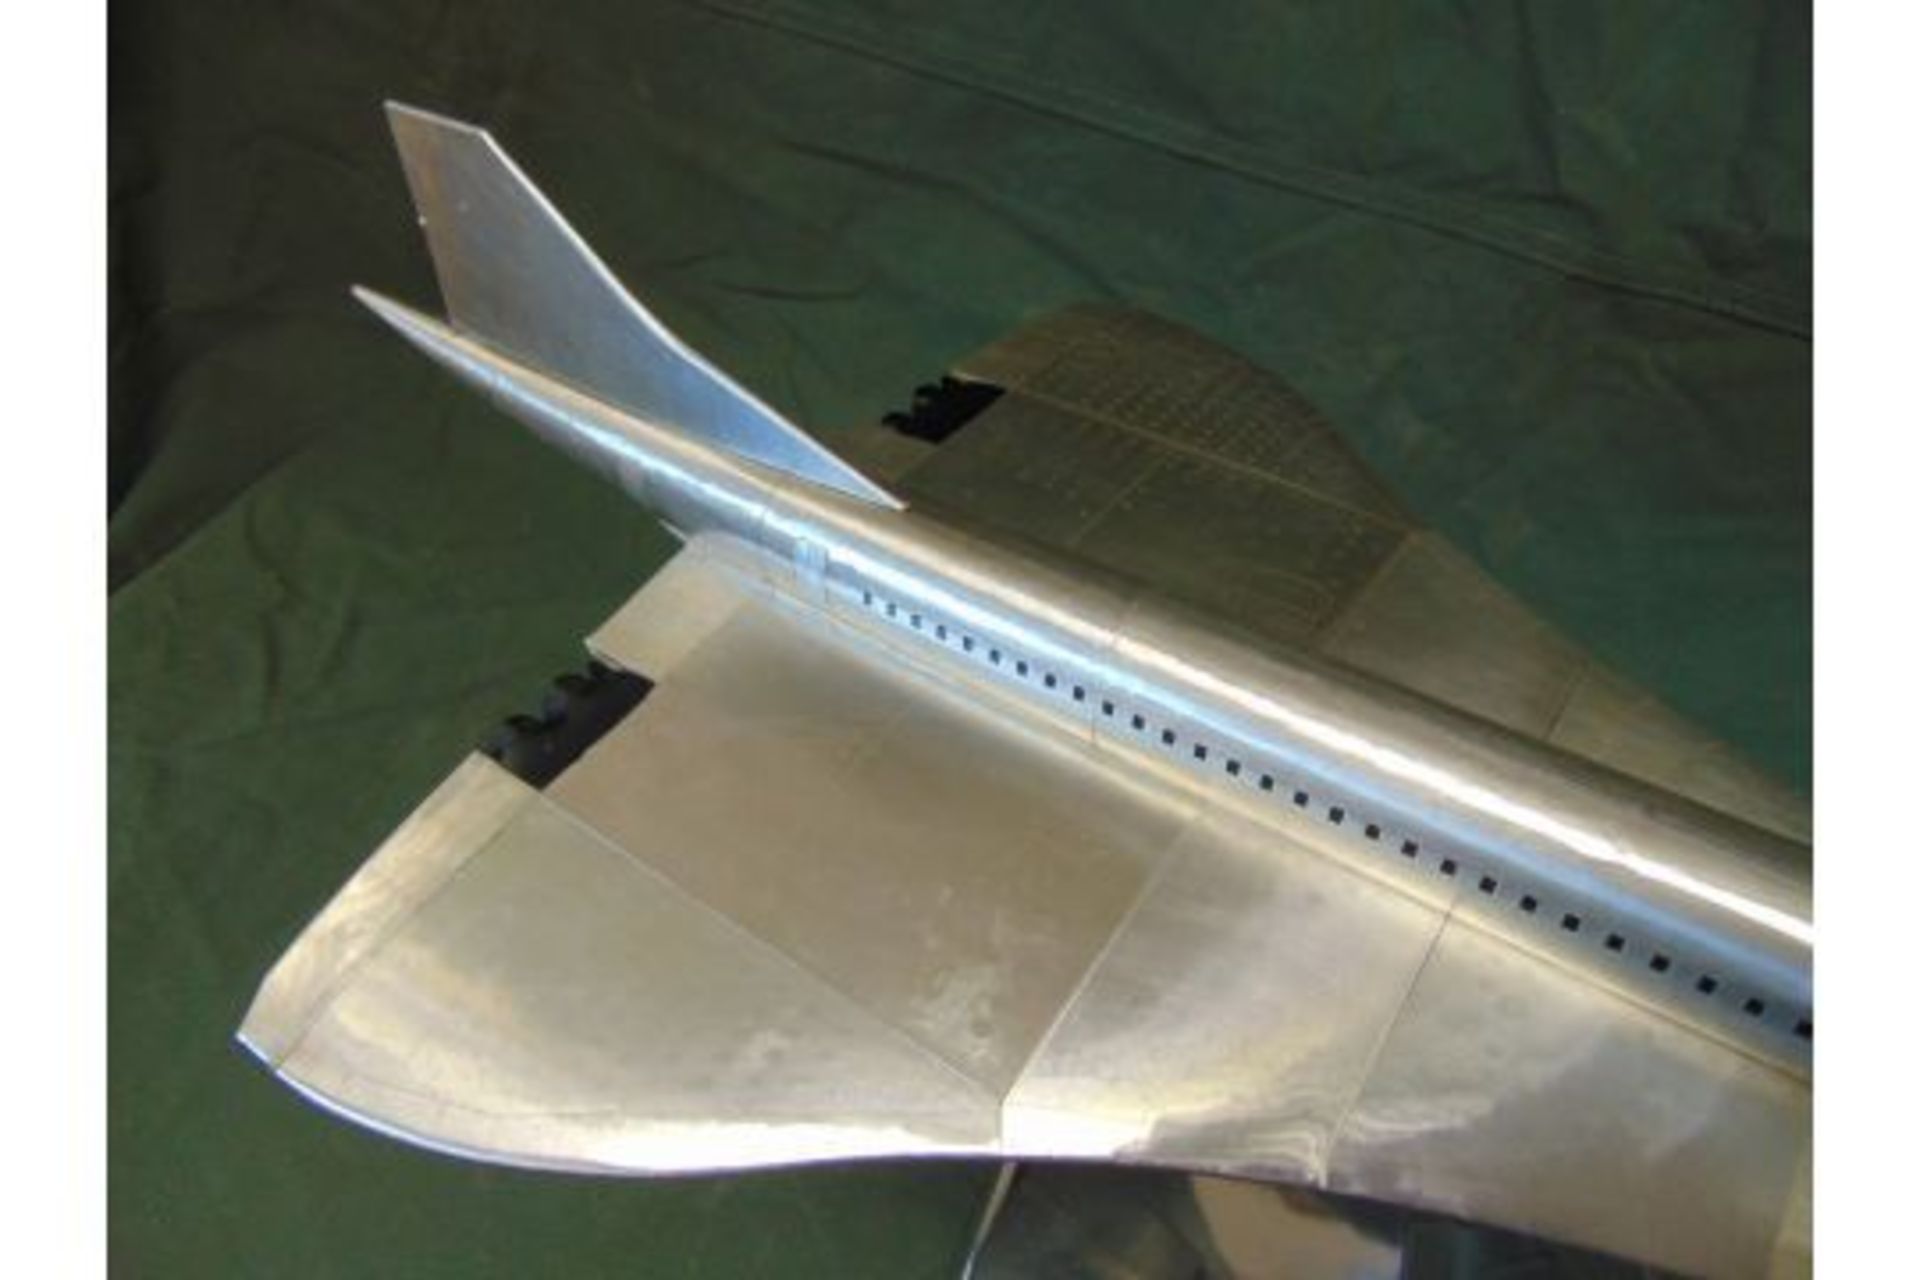 JUST LANDED A BEAUTIFUL!! Large Aluminium CONCORDE Model - Image 10 of 14